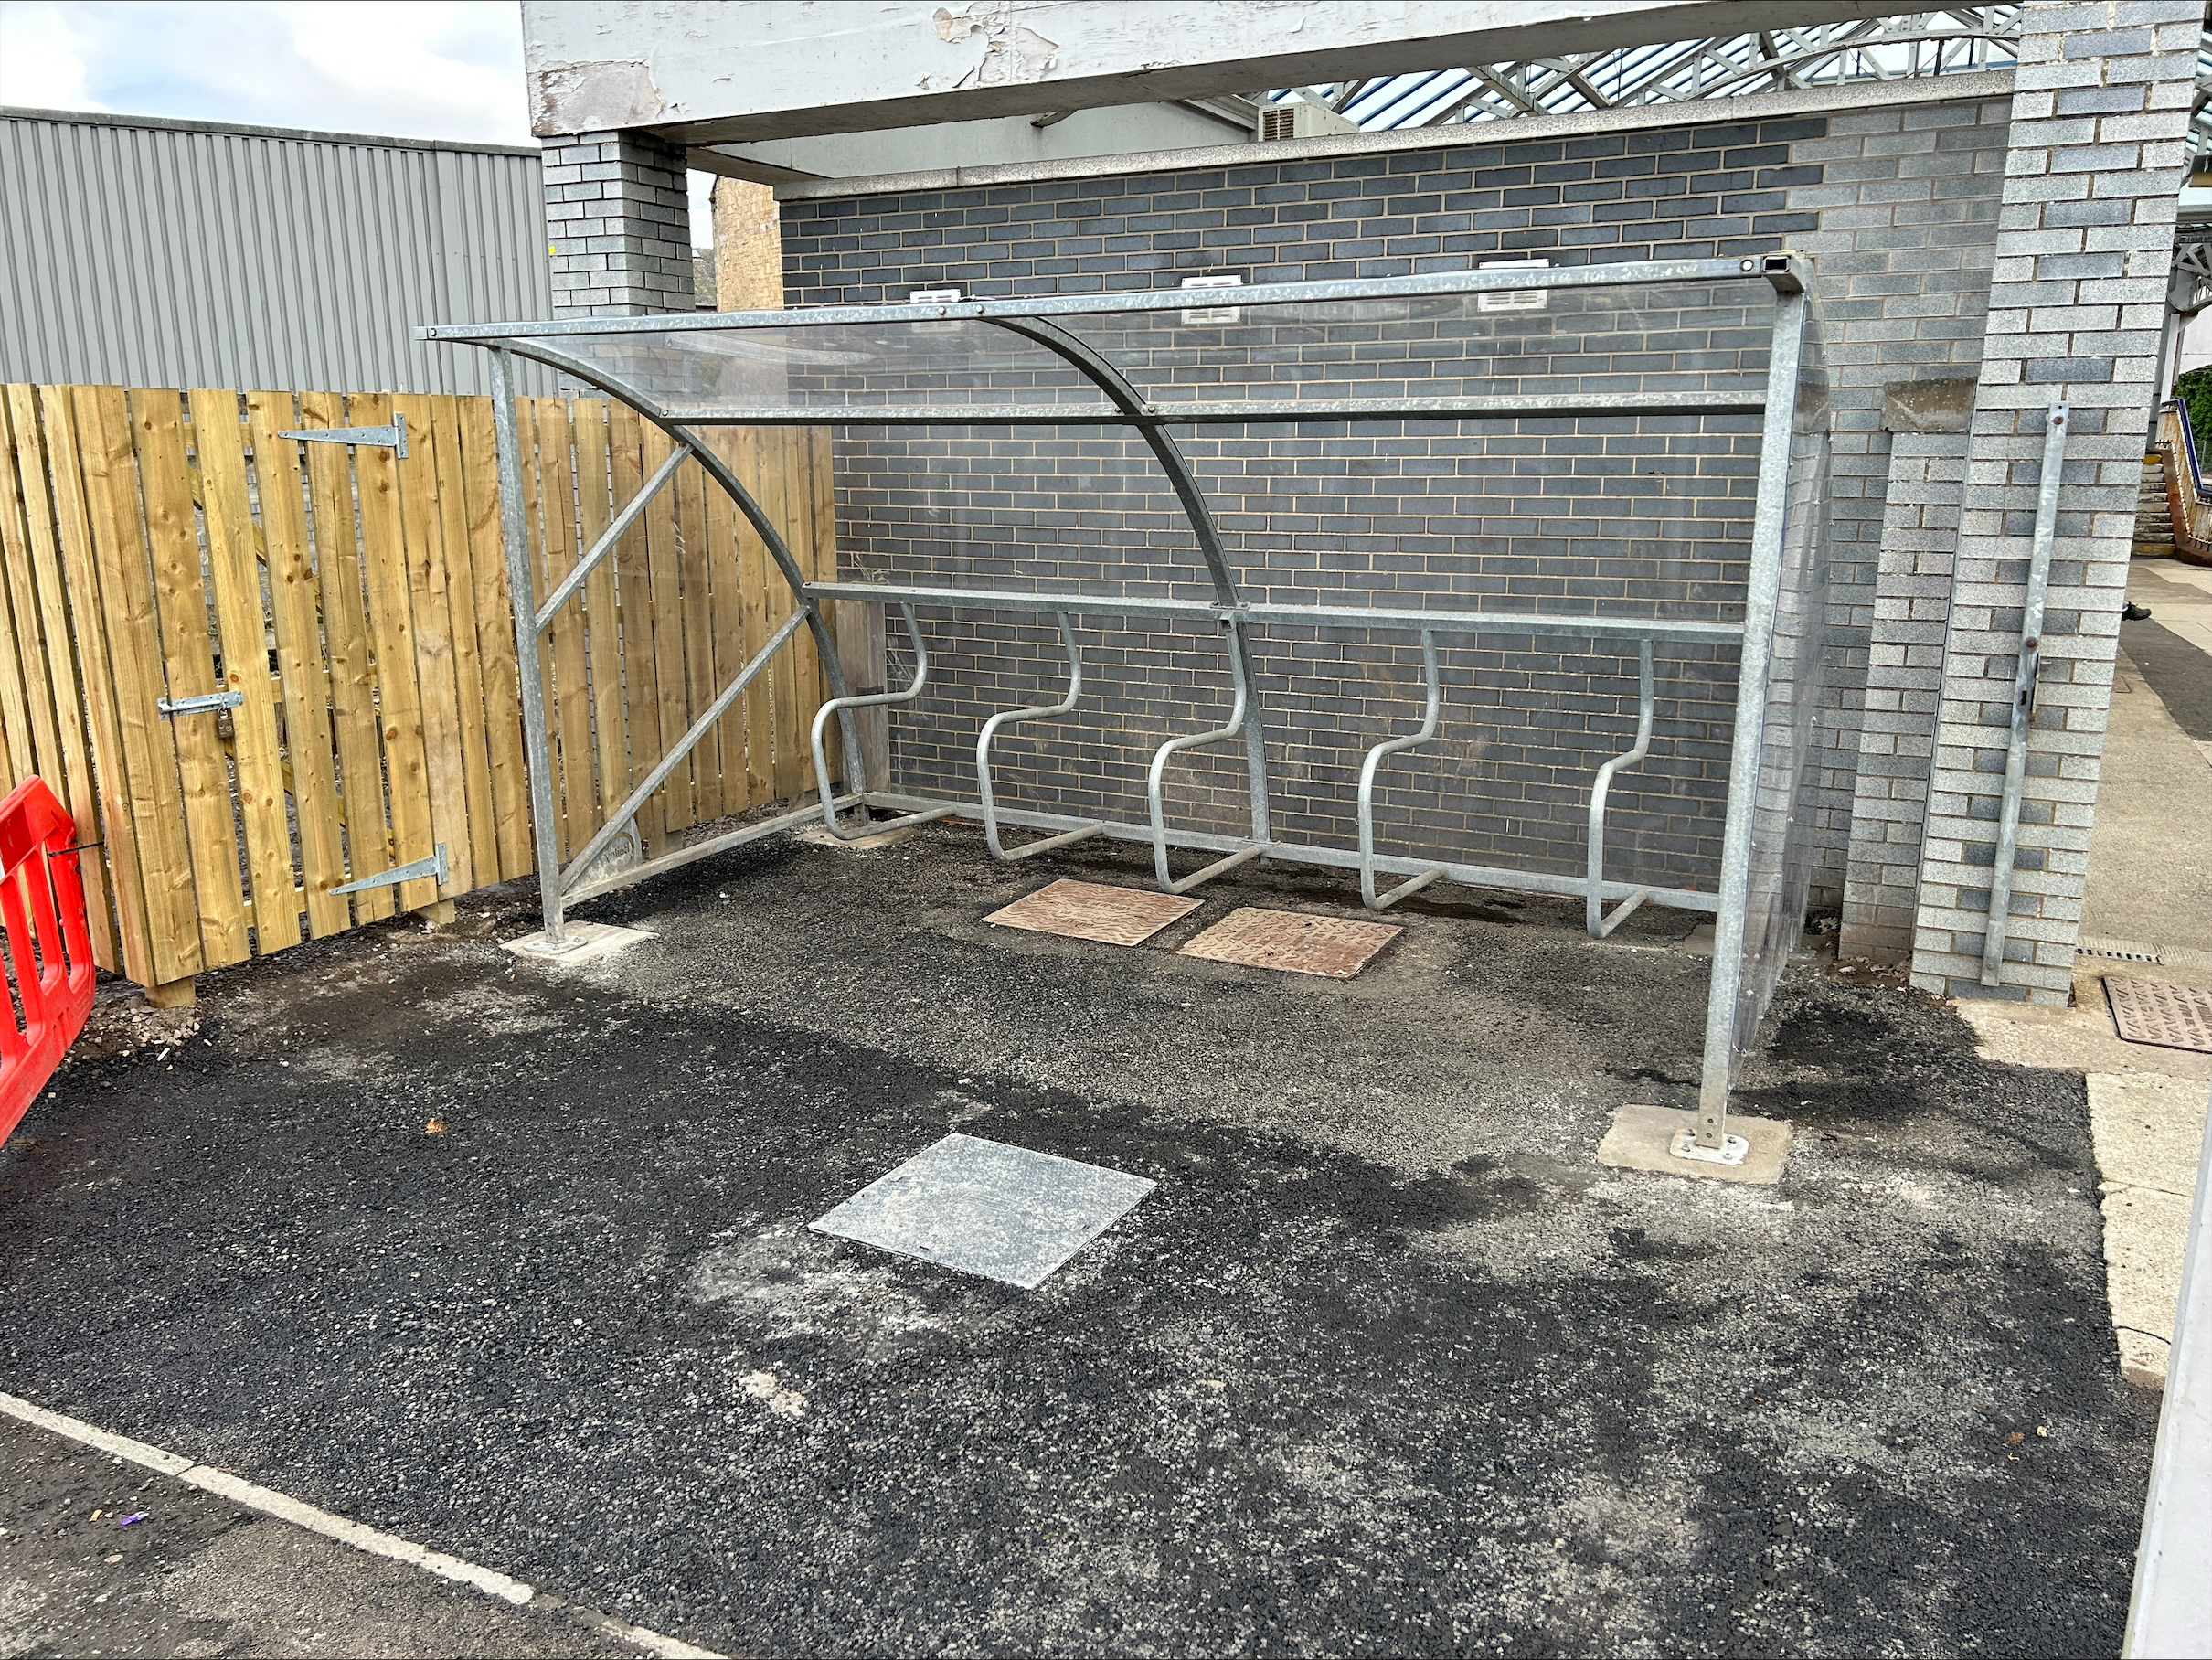 Bike shelter at Port Glasgow station relocated to new home